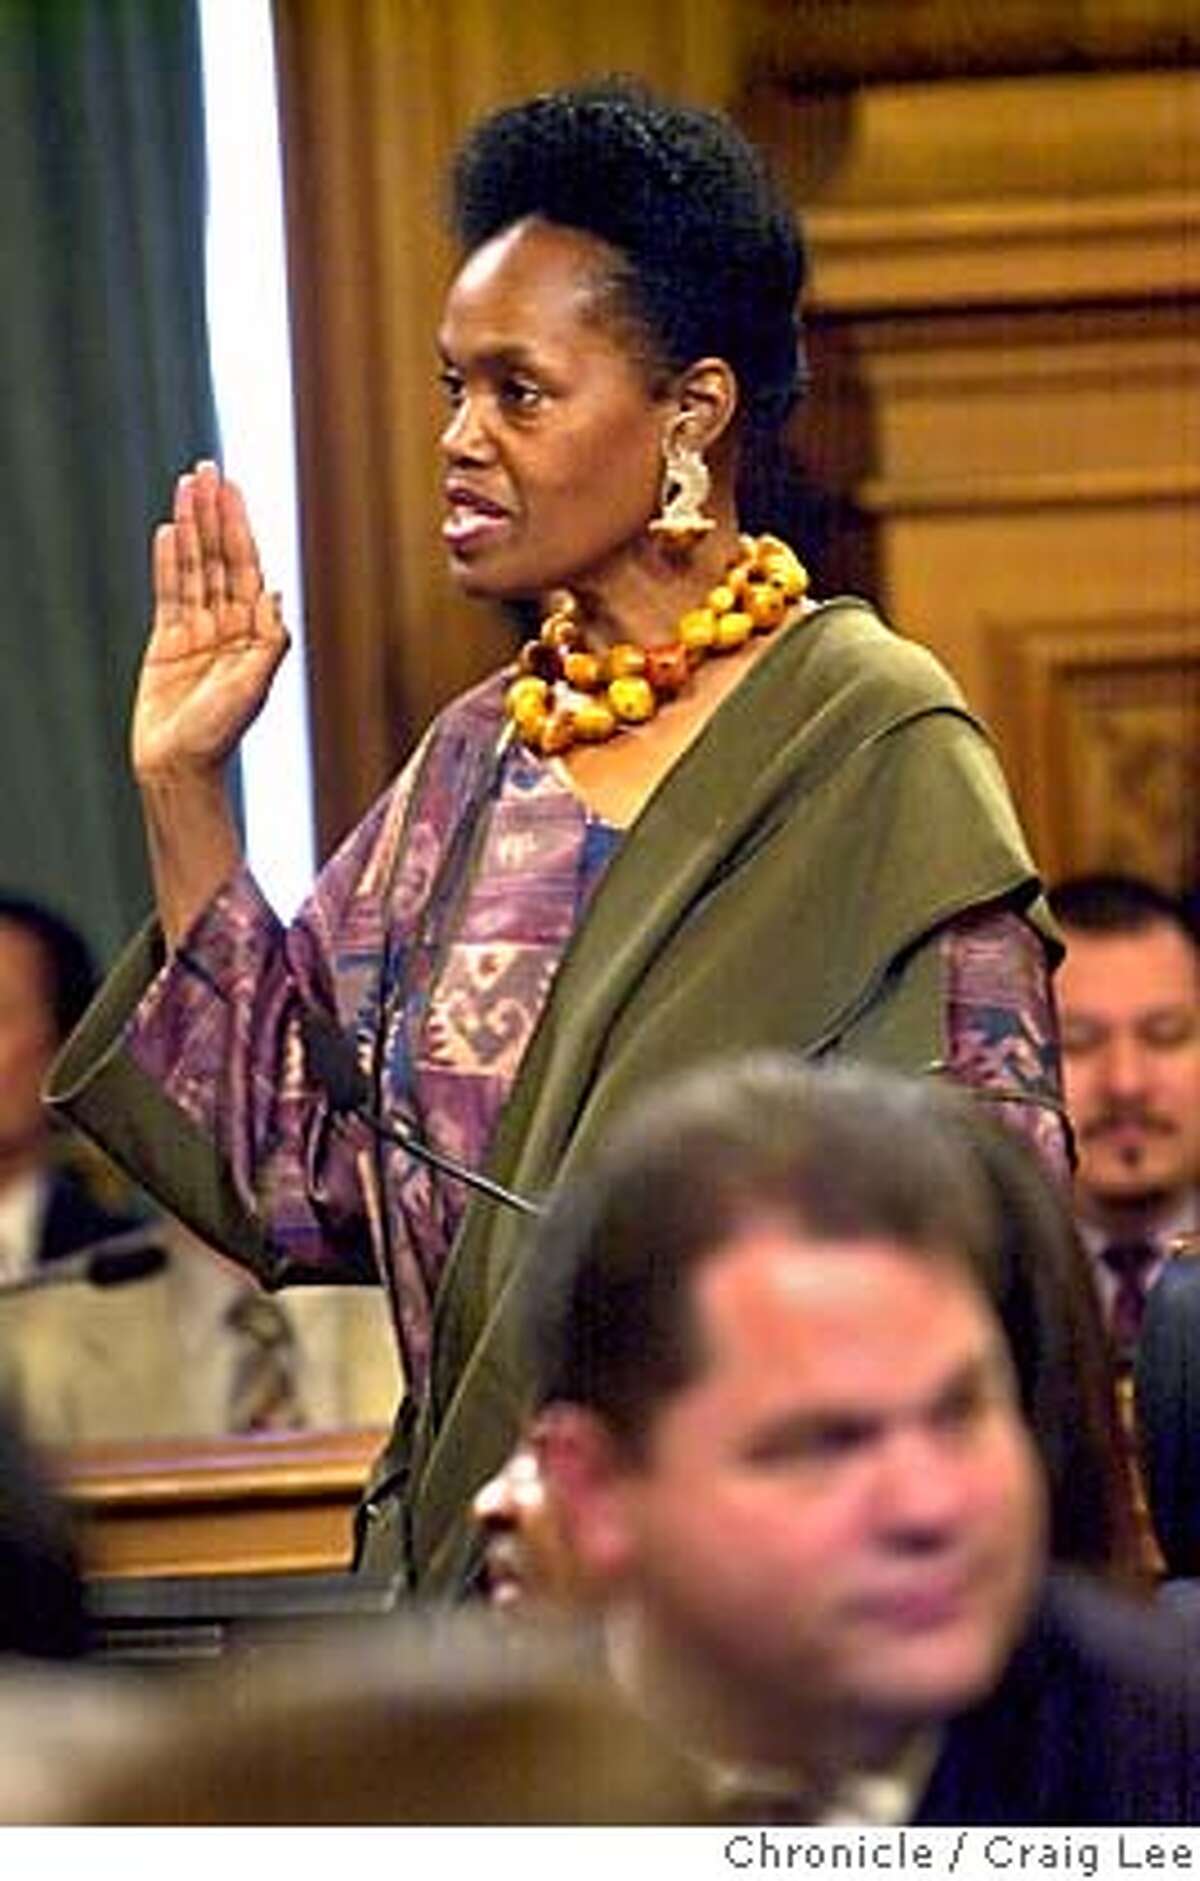 Two new members and three incumbents of San Francisco Board of Supervisors being sworn into office. Photo of Sophie Maxwell being sworn in. Photo by Craig Lee/San Francisco Chronicle